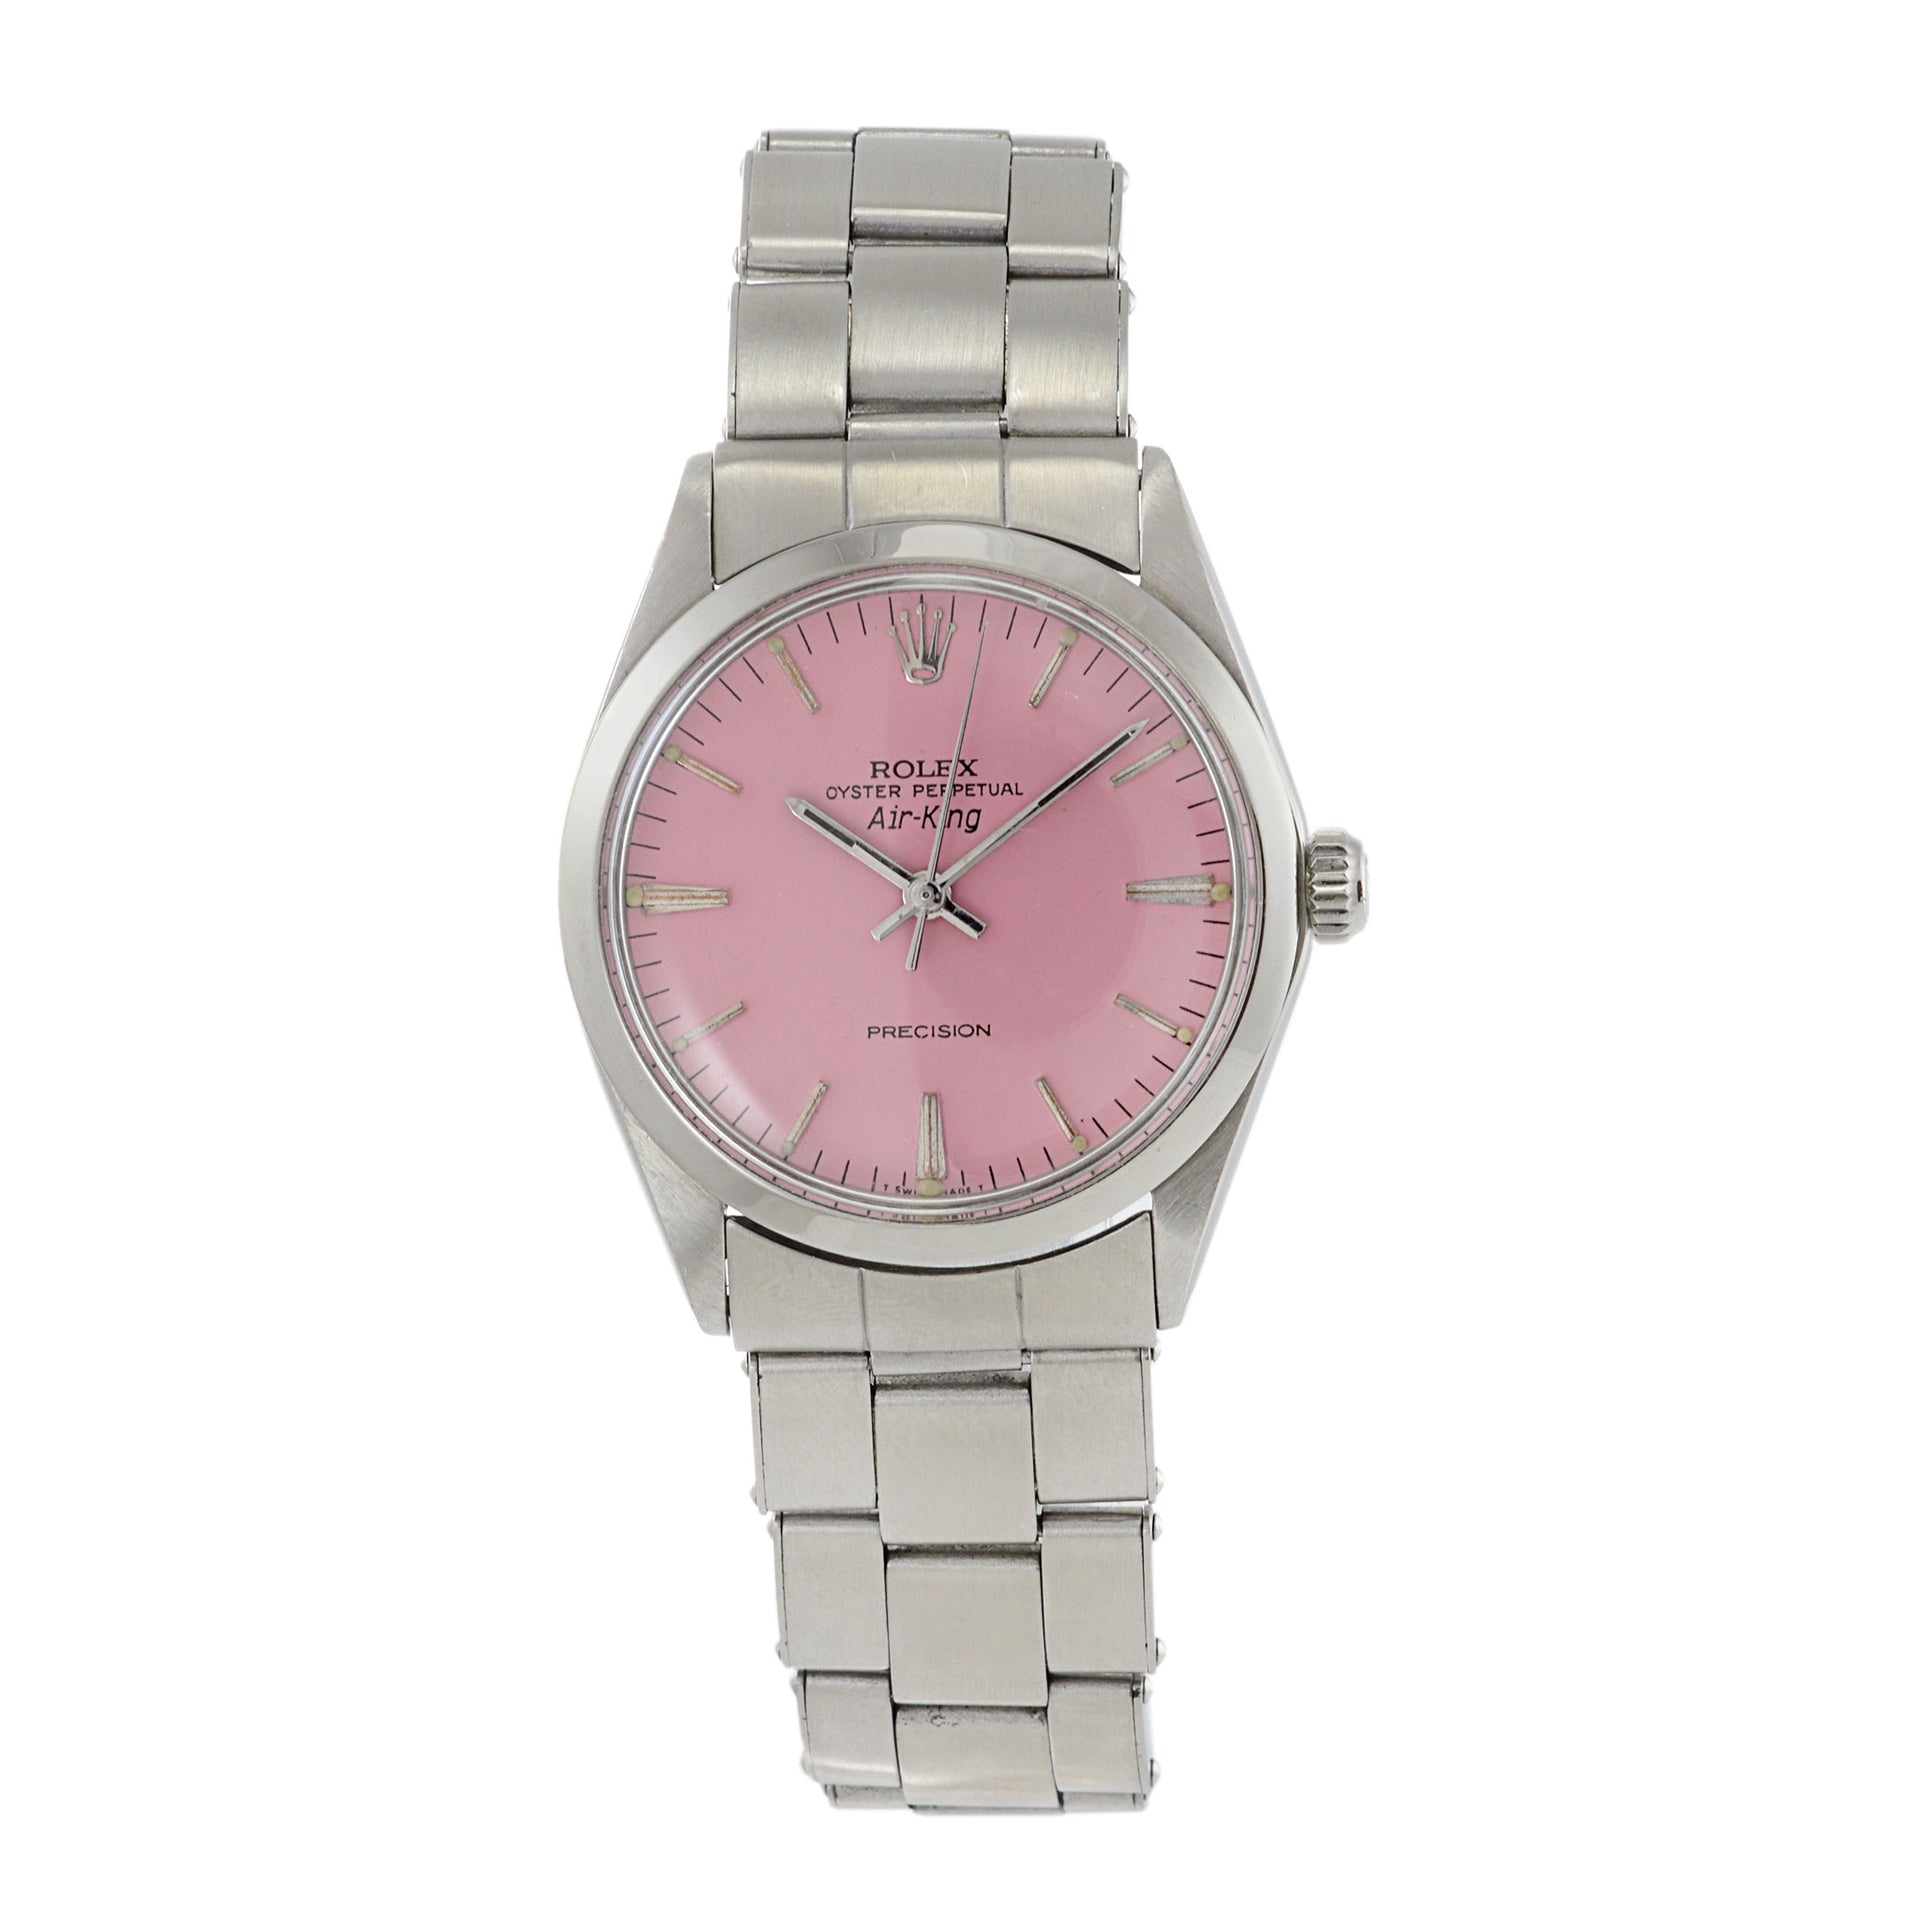 Vintage 1968 Rolex Air-King Reference 5500 Custom Pink Dial Automatic Watch